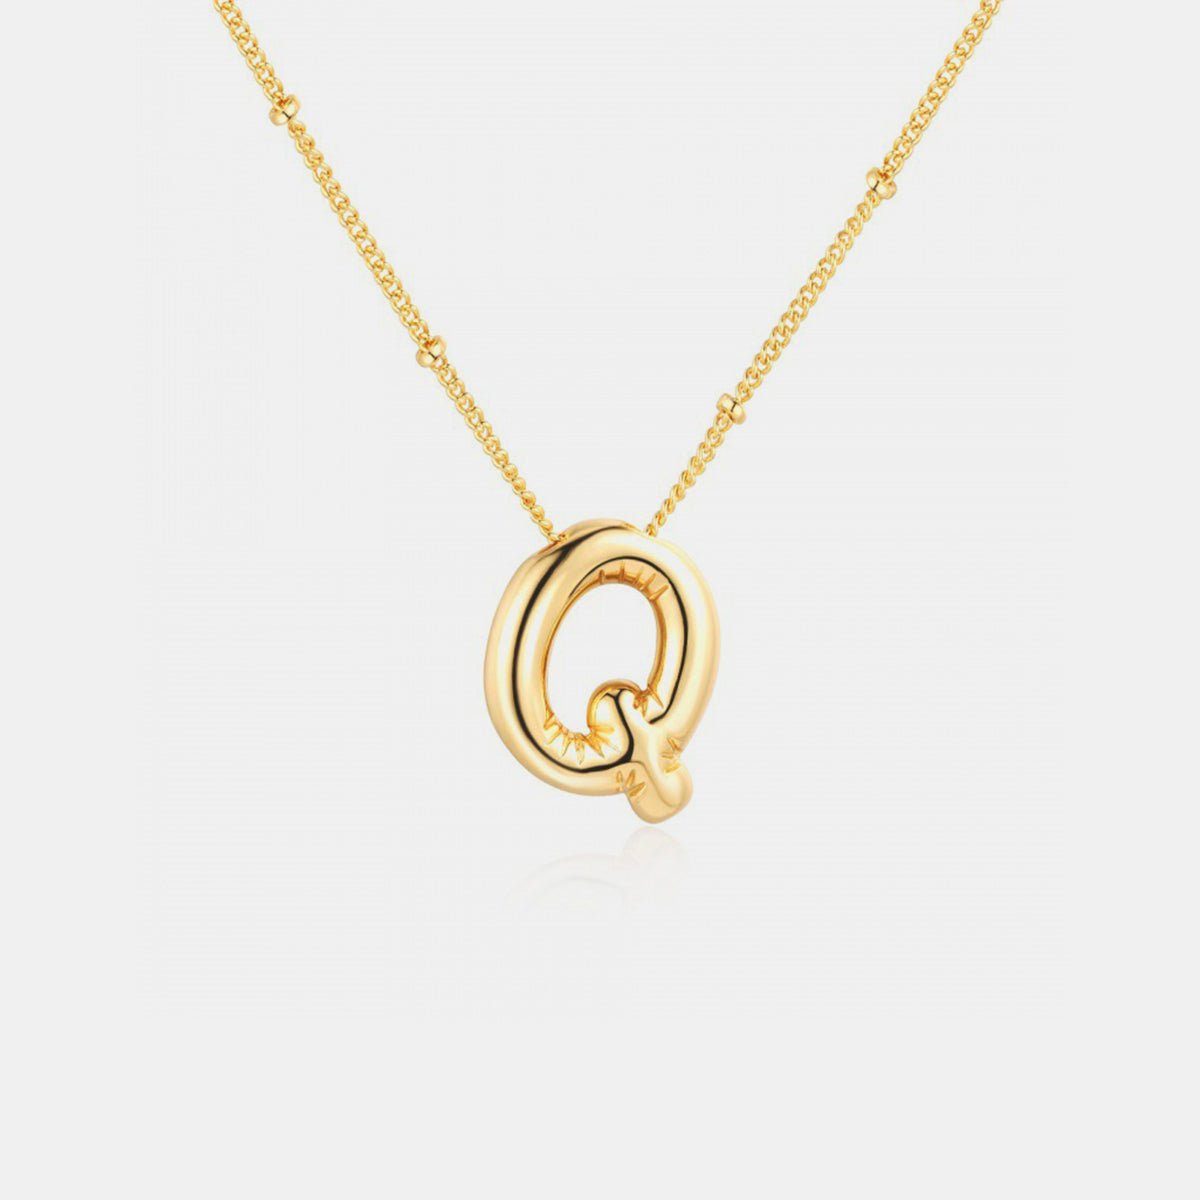 Bravada Gold-Plated Letter Pendant Necklace K-S Jewelry Featured Fashion Bravada